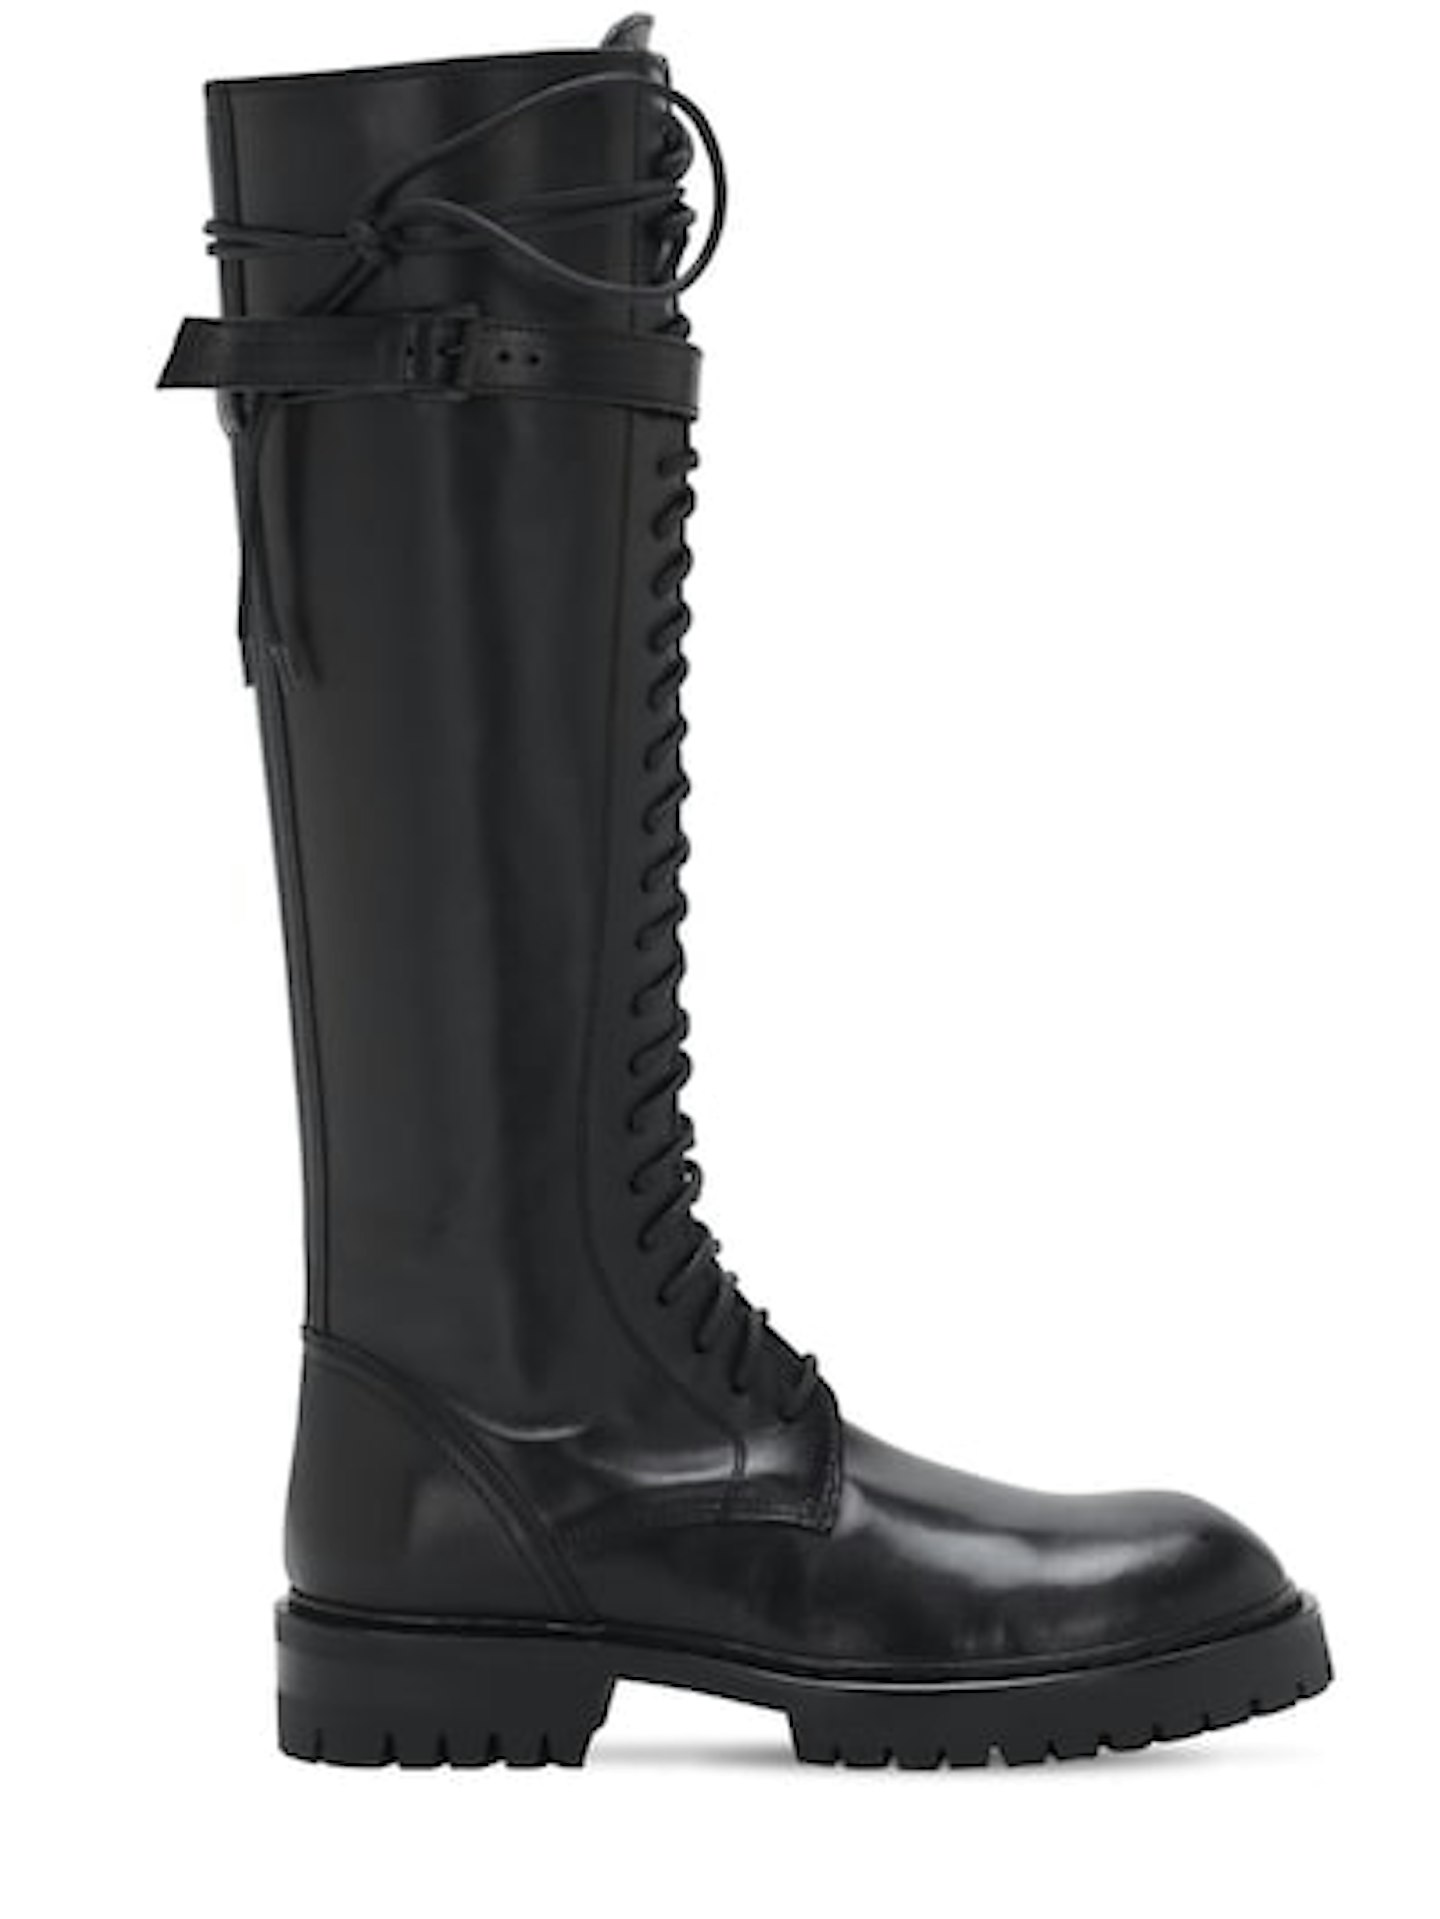 ANN DEMEULEMEESTER, 30MM TALL LEATHER BOOTS, £835.00